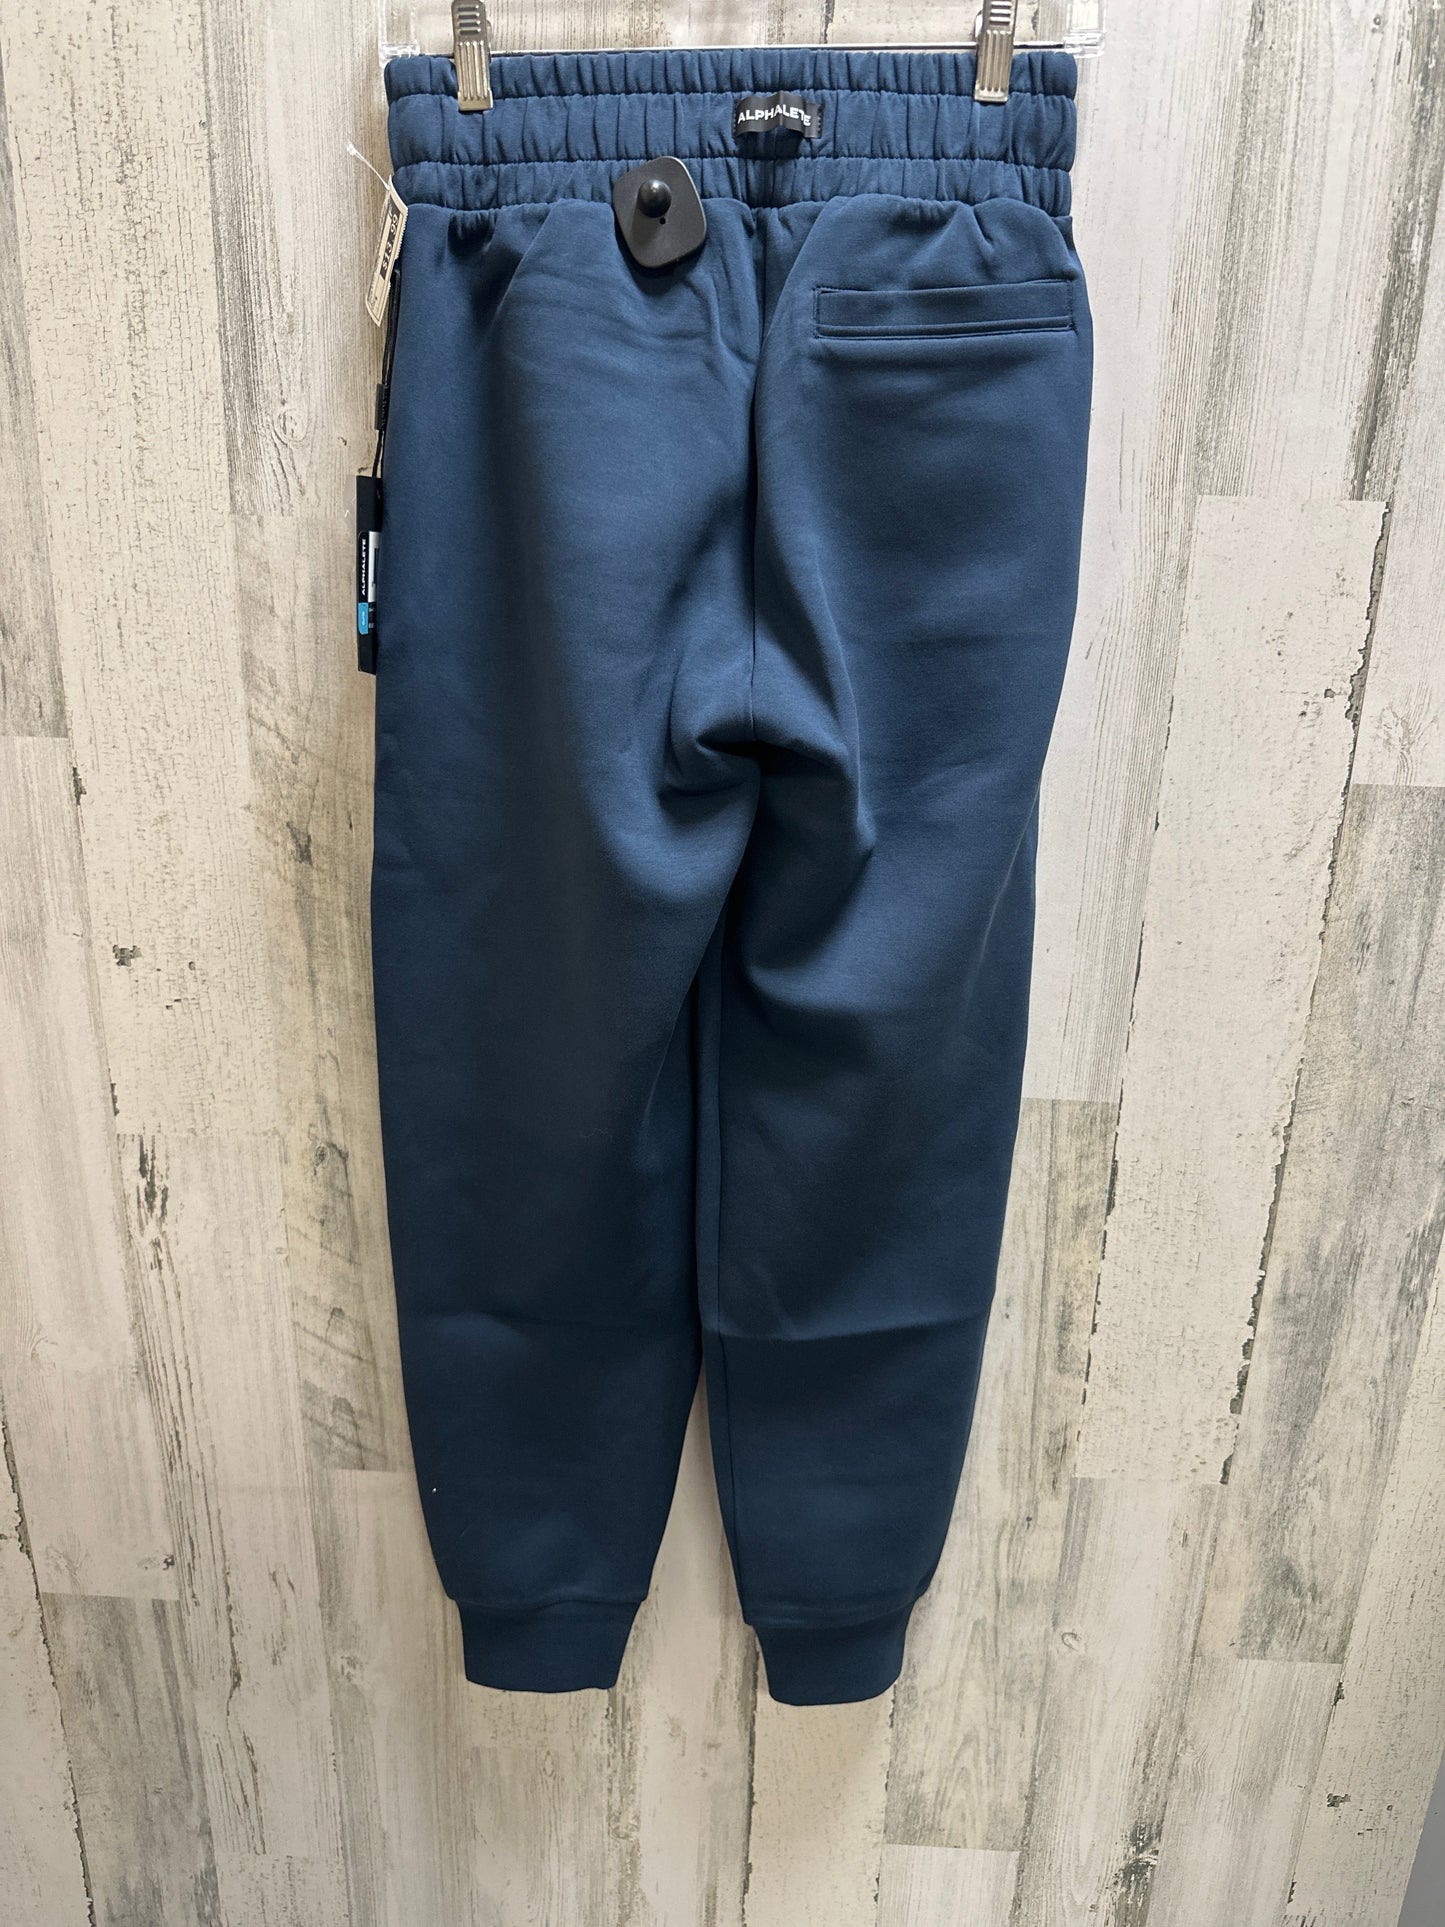 Navy Athletic Pants Clothes Mentor, Size S